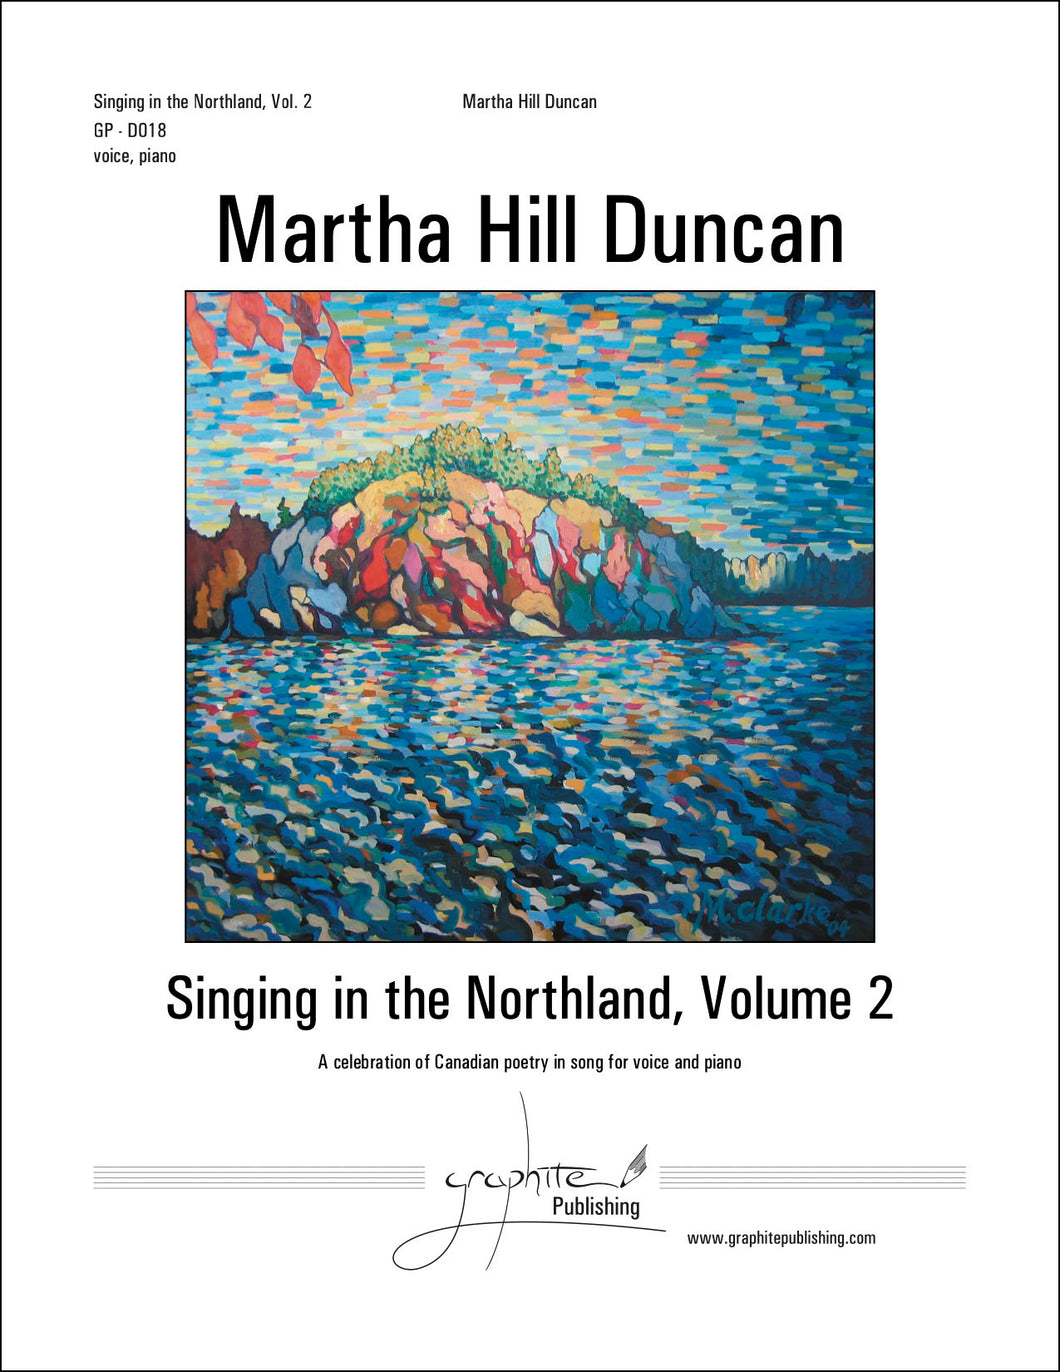 Cover Image for Singing in the Northland Volume 2